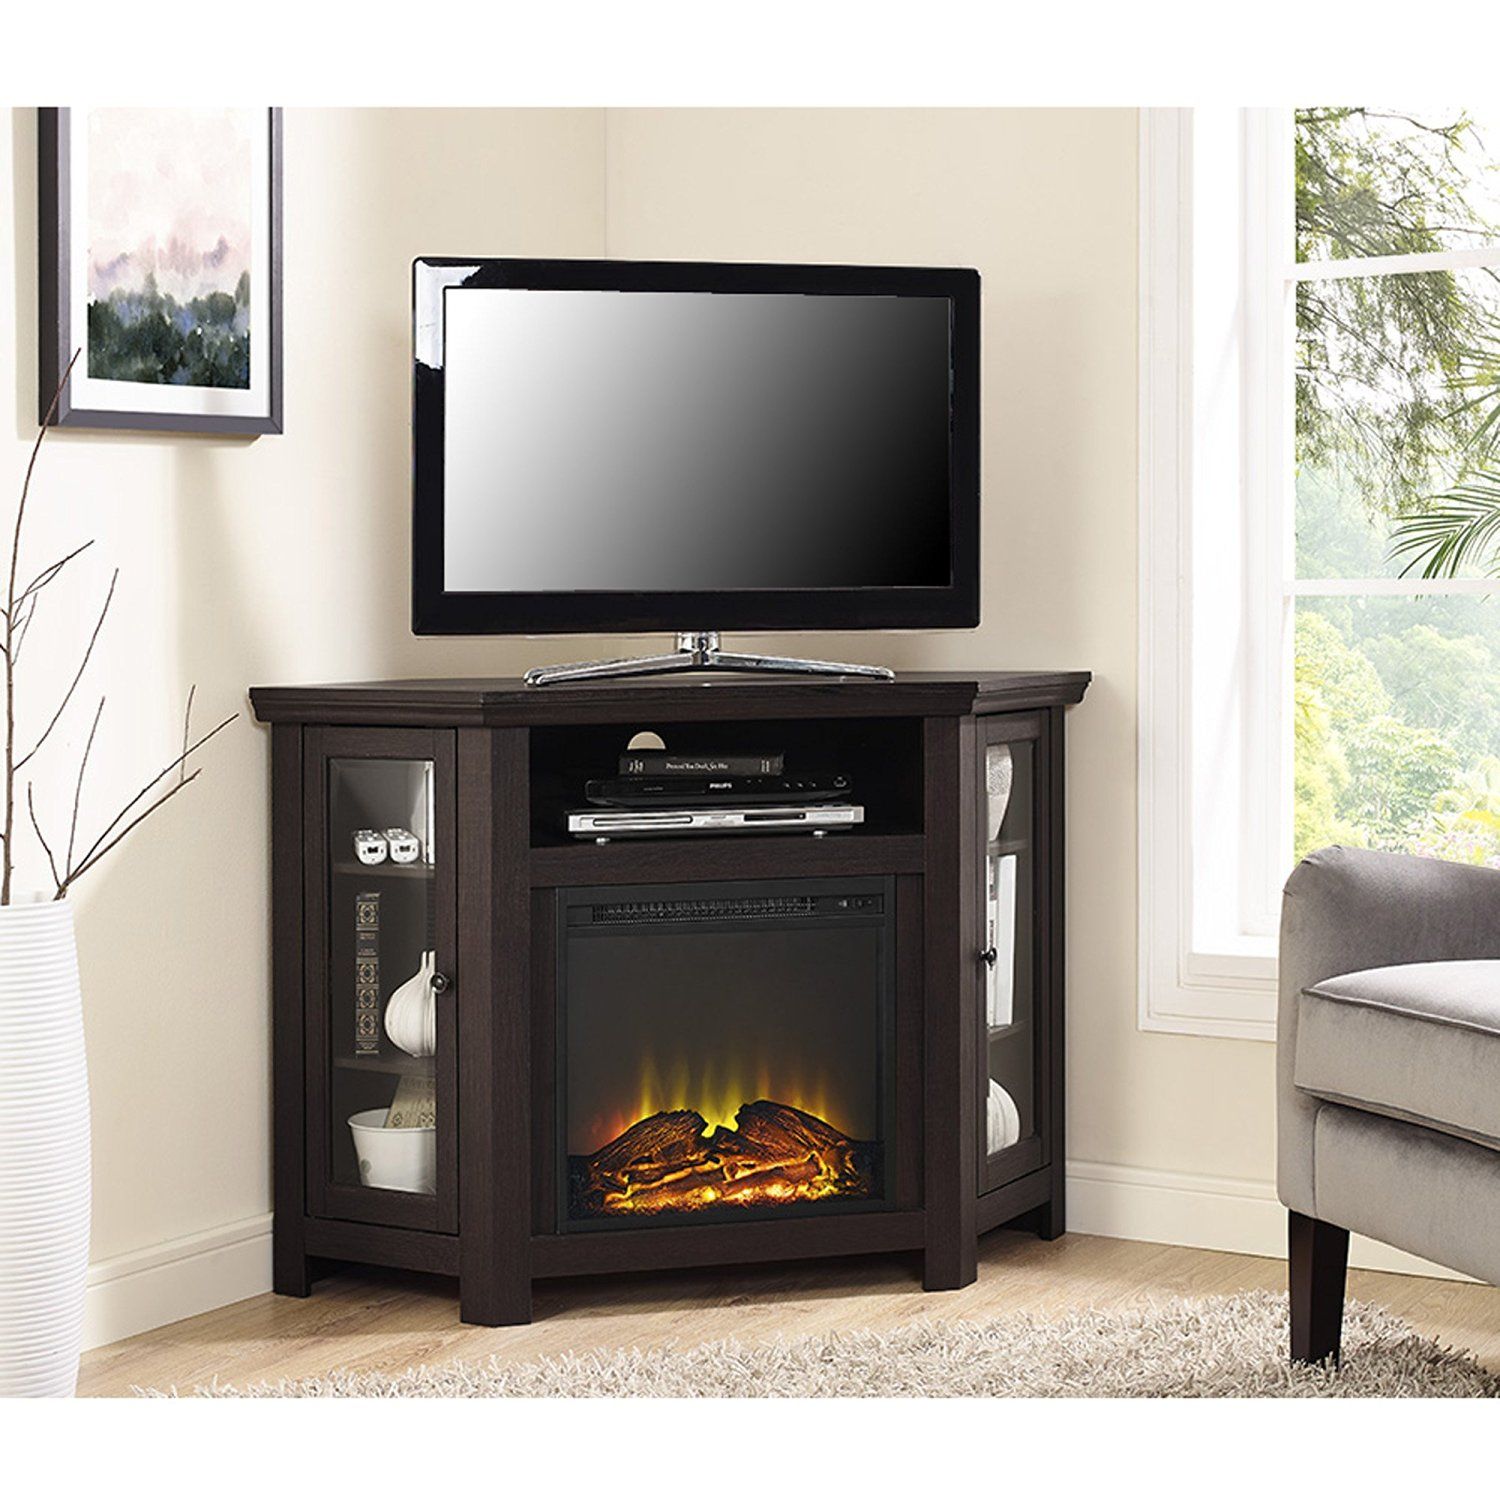 Cheap Corner Fireplace, Find Corner Fireplace Deals On With Dark Brown Corner Tv Stands (View 14 of 15)